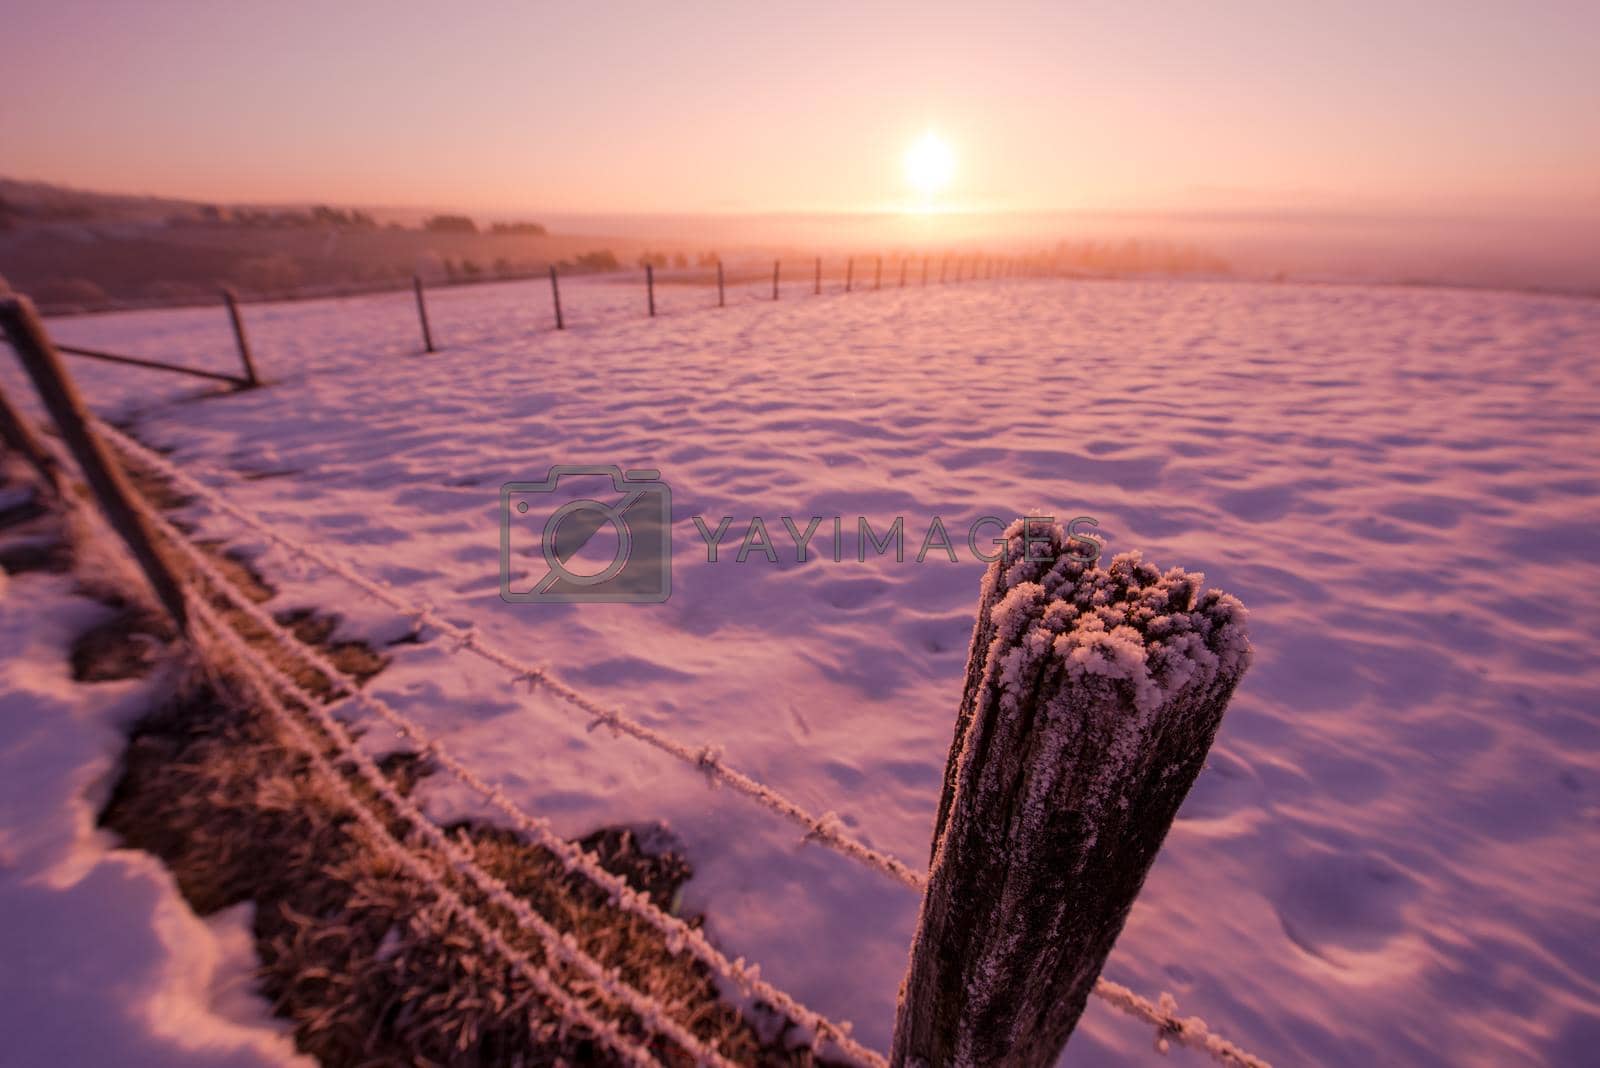 winter landscape scenic   fresh snow  against purple violet  sky with long shadows on beautiful fresh morning